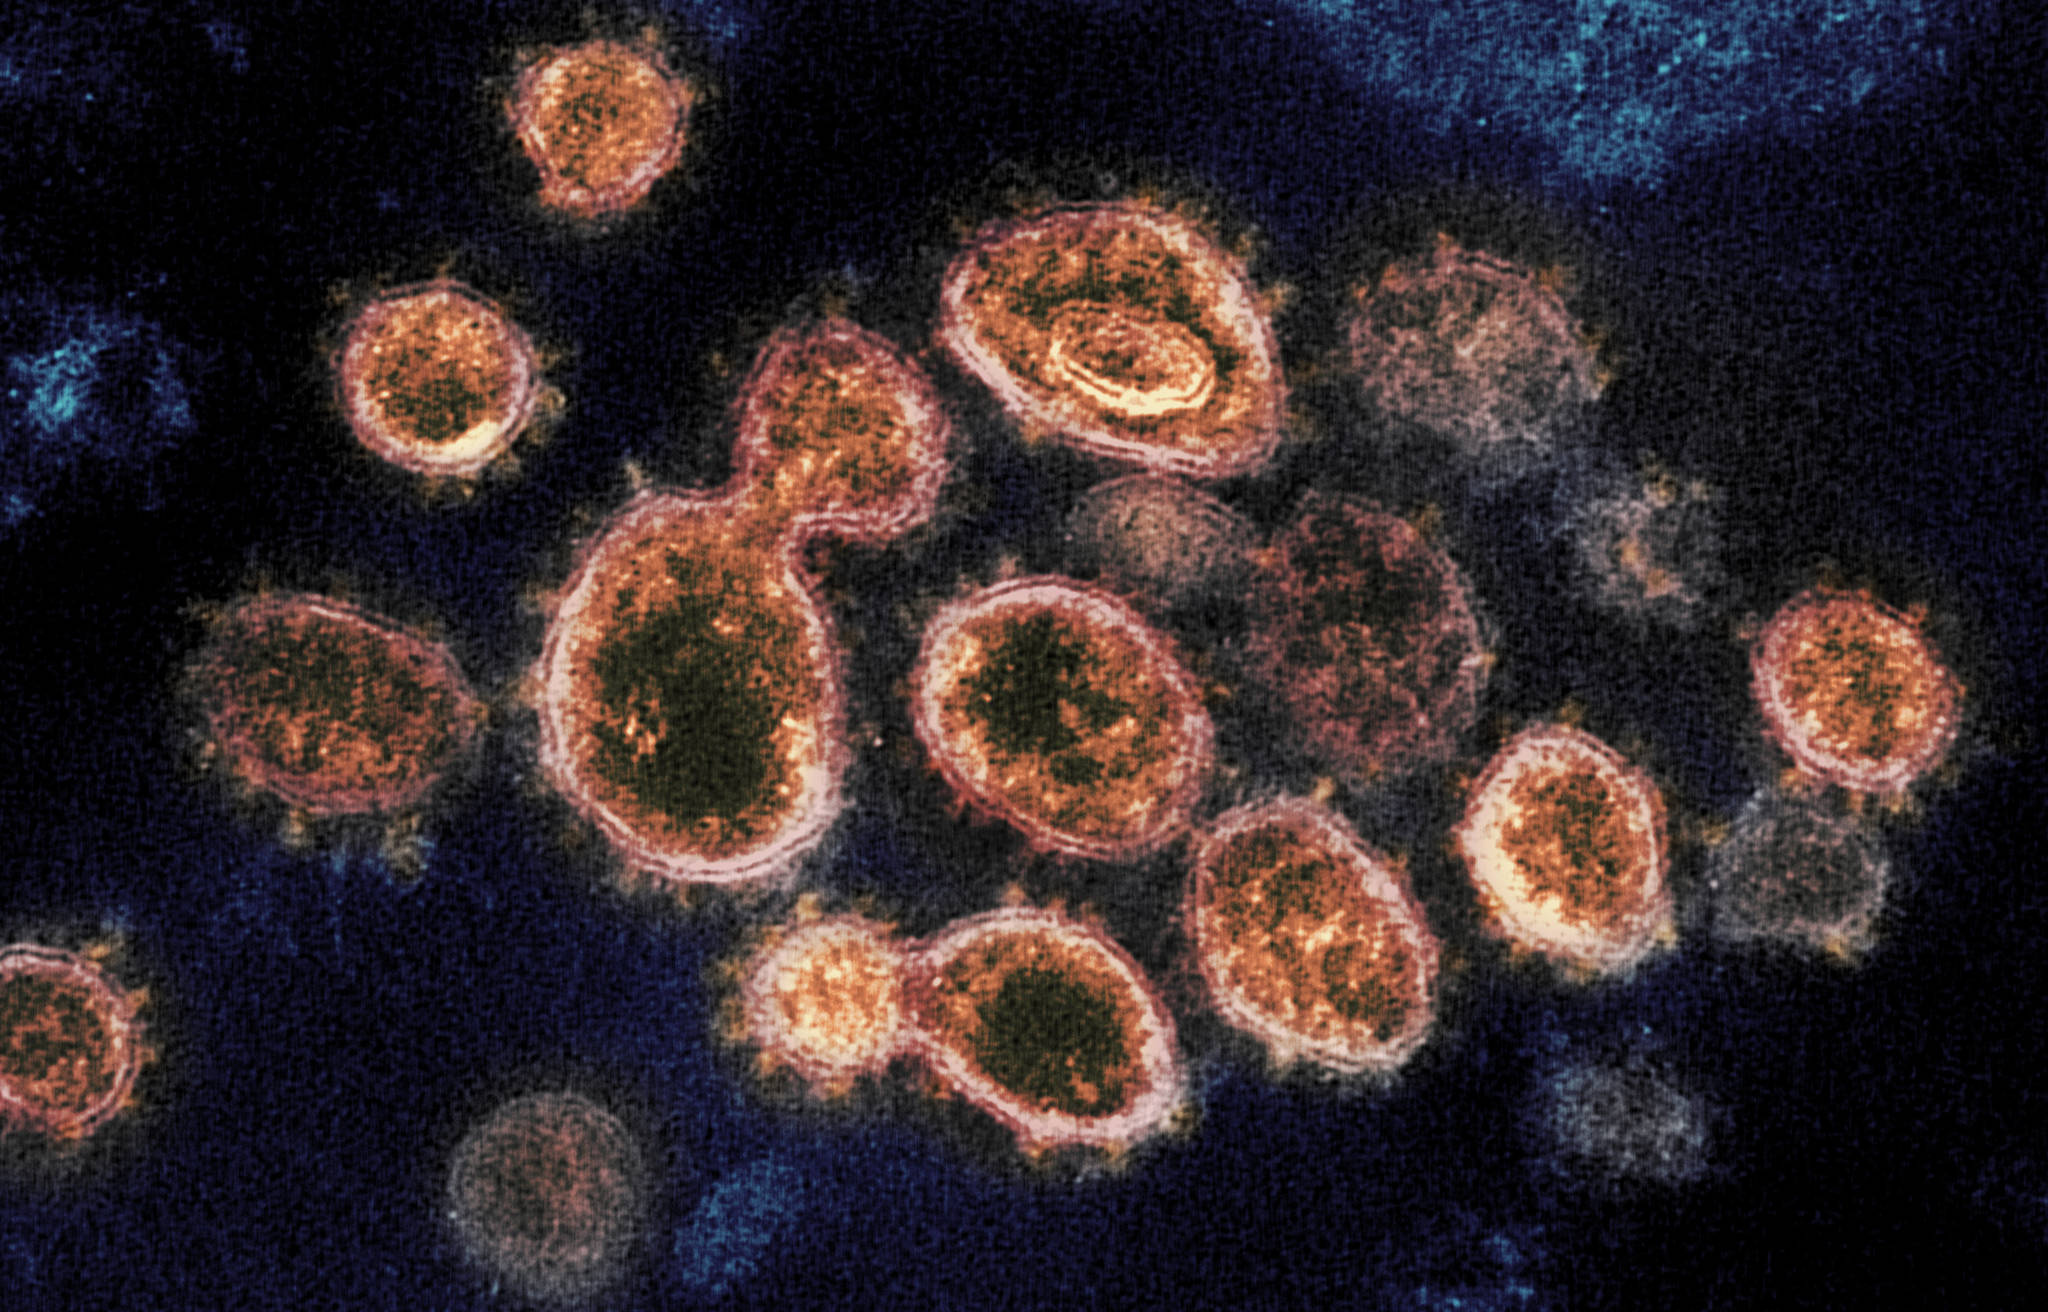 This image provided by National Institute of Allergy and Infectious Diseases - Rocky Mountain Laboratories shows SARS-CoV-2 virus particles which causes COVID-19, isolated from a patient in the U.S., emerging from the surface of cells cultured in a lab. (NIAID-RML via AP)